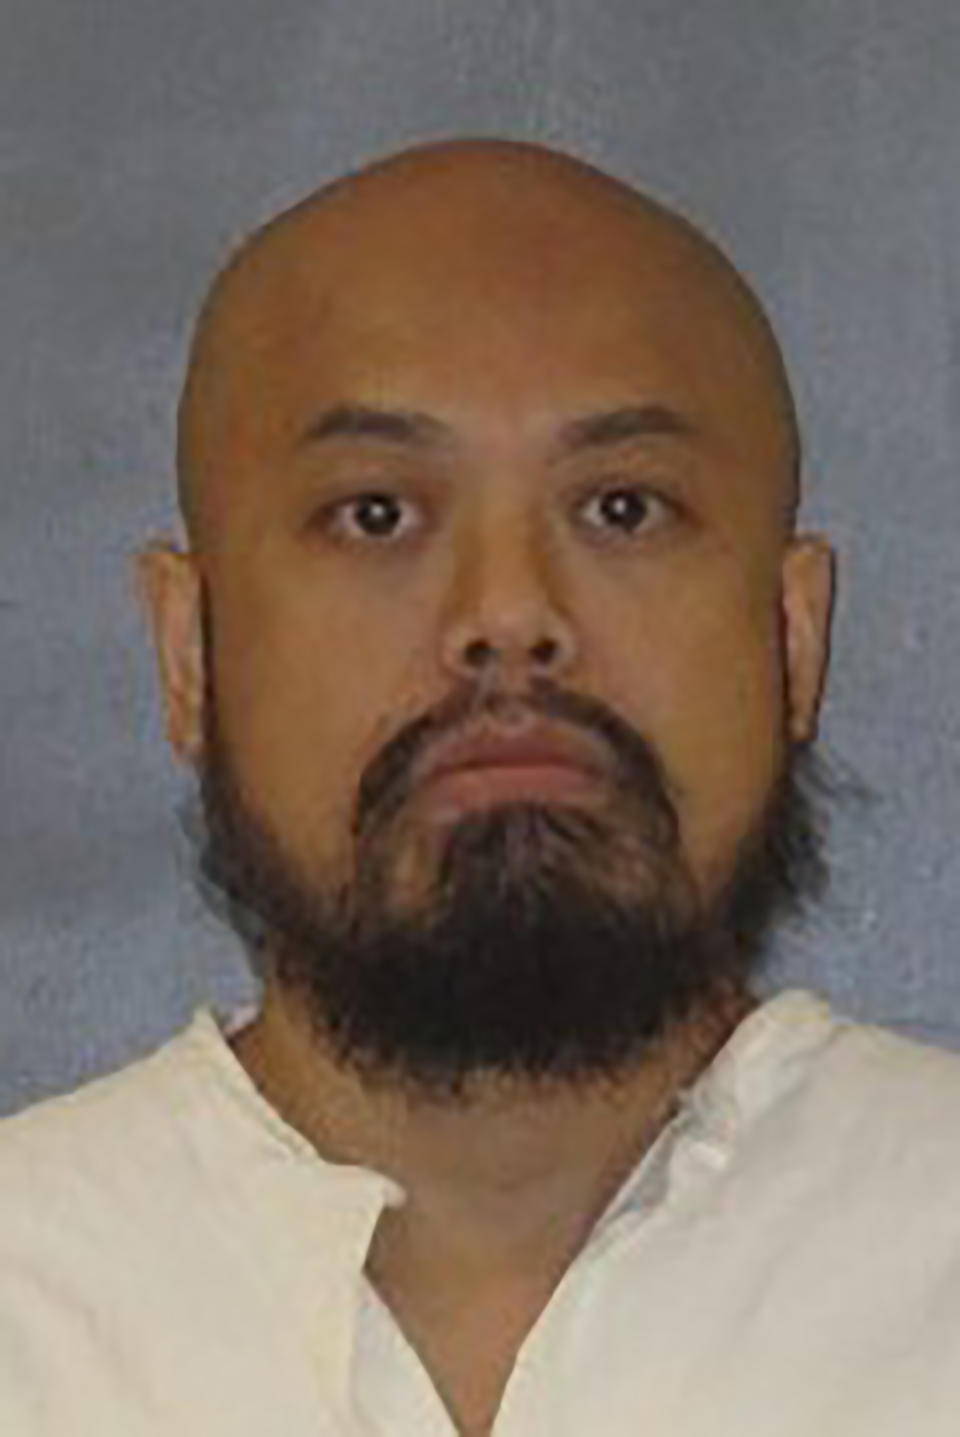 This undated photo provided by The Texas Department of Criminal Justice shows Kosoul Chanthakoummane, a Texas death row inmate. Executions in the nation's busiest capital punishment state are likely to face new delays because of legal questions tied to spiritual advisers and what role they play in the death chamber. The most recent delay was granted Thursday for Stephen Barbee. He was set to be executed Tuesday, but U.S. District Judge Kenneth Hoyt in Houston ruled Barbee has initially shown Texas’ “limitations in the execution chamber substantially burden the exercise of his religion.” Chanthakoummane, set to die Nov. 10, is seeking a stay. (Texas Department of Criminal Justice via AP)